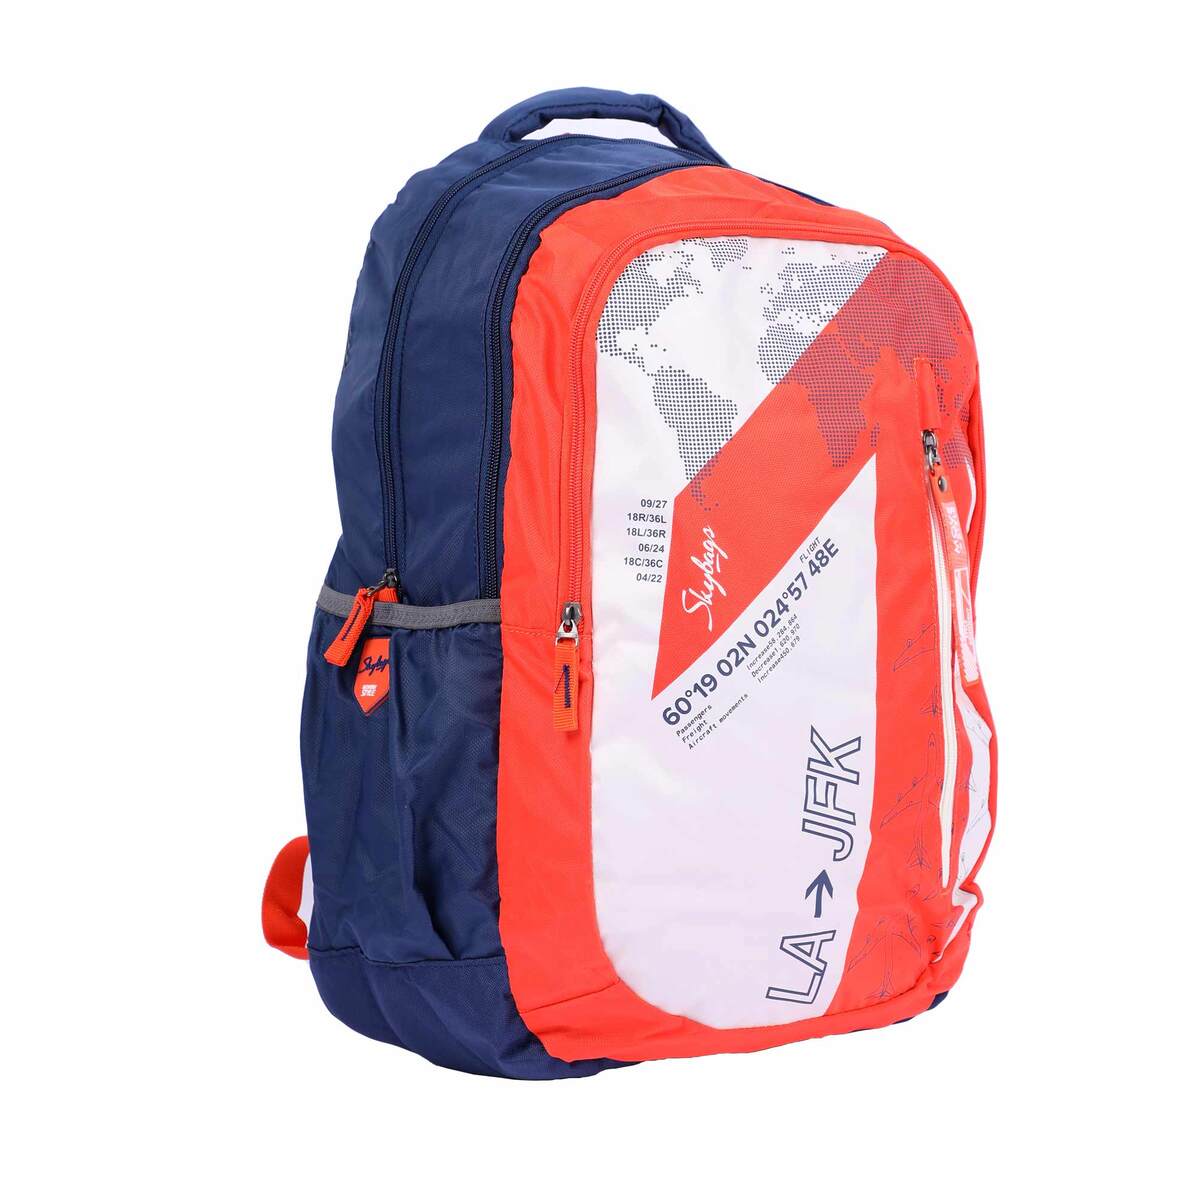 Skybags Backpack FIGP3 19inch, Orange